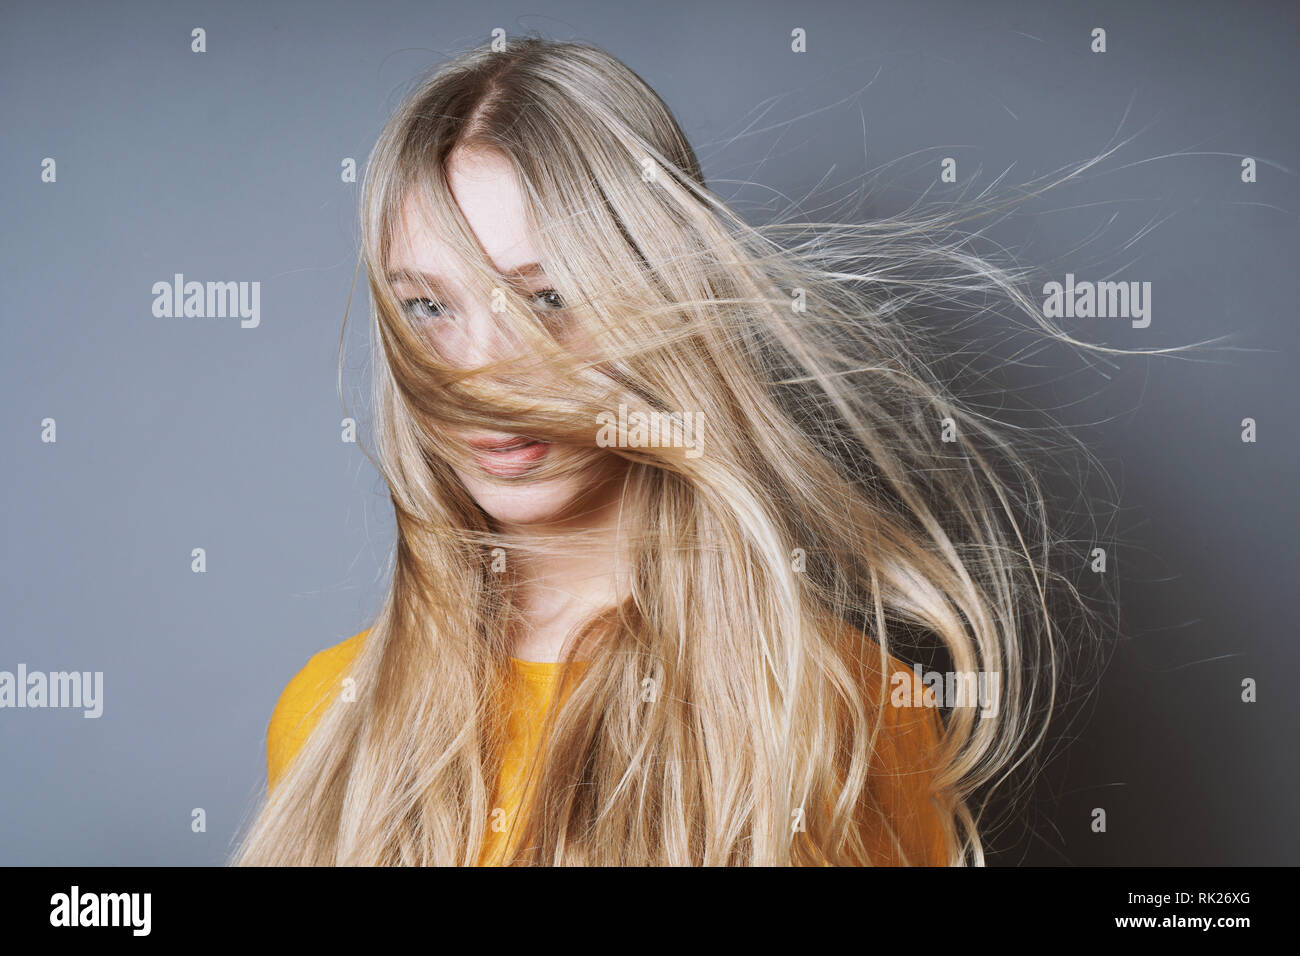 blond woman with long windswept tousled hair Stock Photo